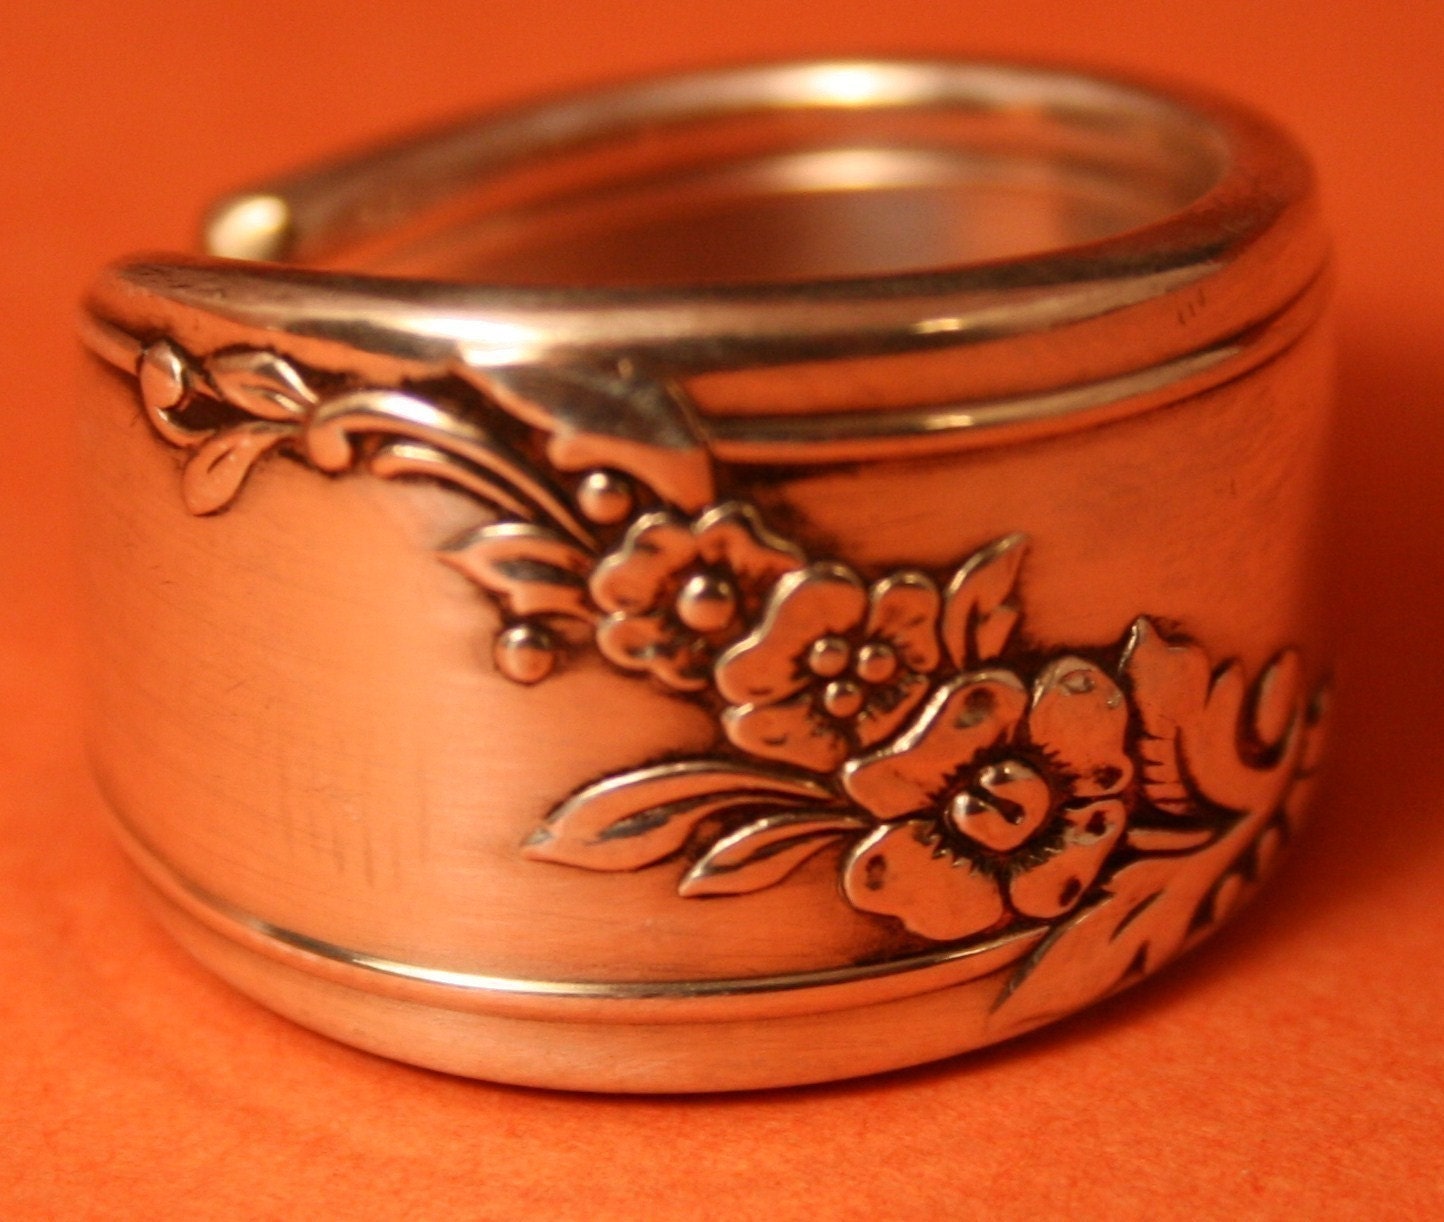 QUEEN BESS 1946 pattern spoon ring is part of my complete line of spoon ring jewelry